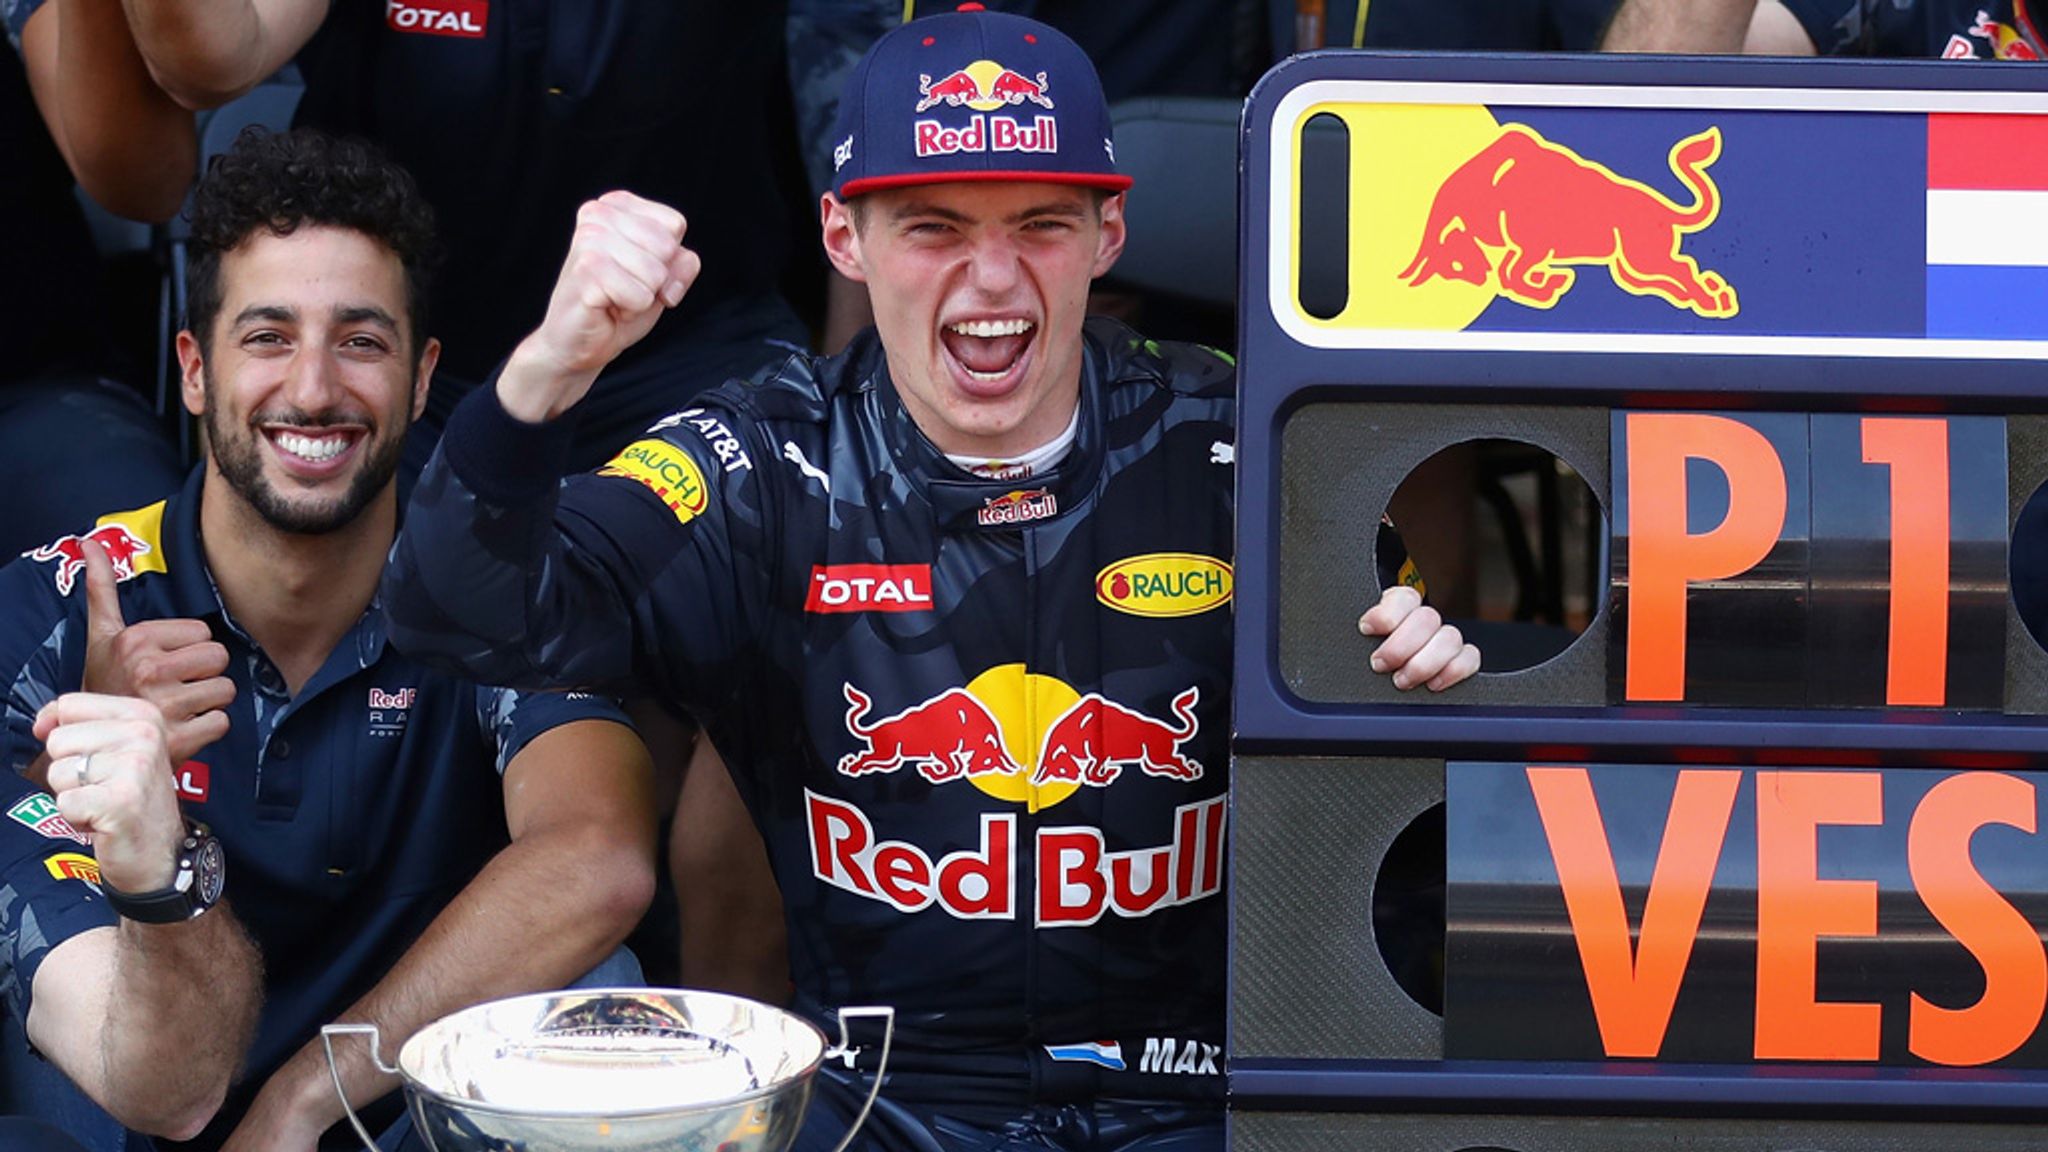 Max Verstappen's first F1 win at the 2016 Spanish GP F1